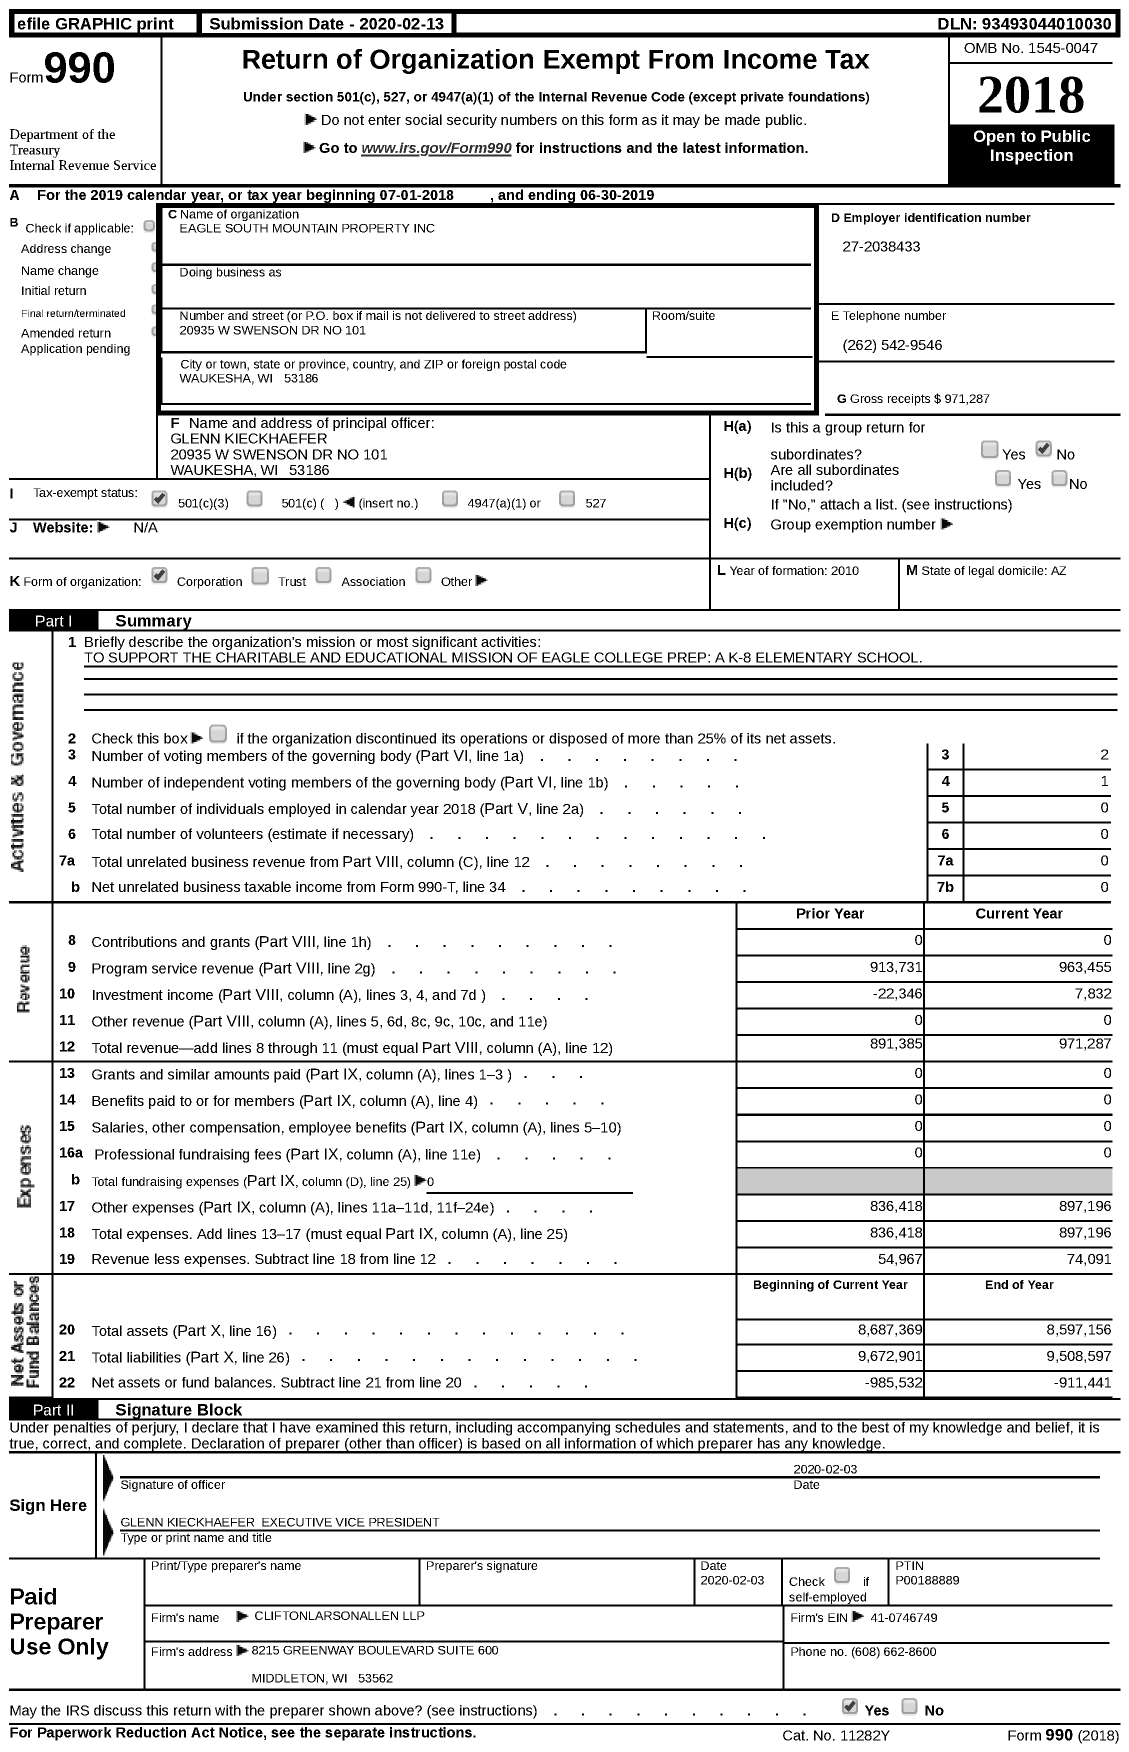 Image of first page of 2018 Form 990 for Eagle South Mountain Property